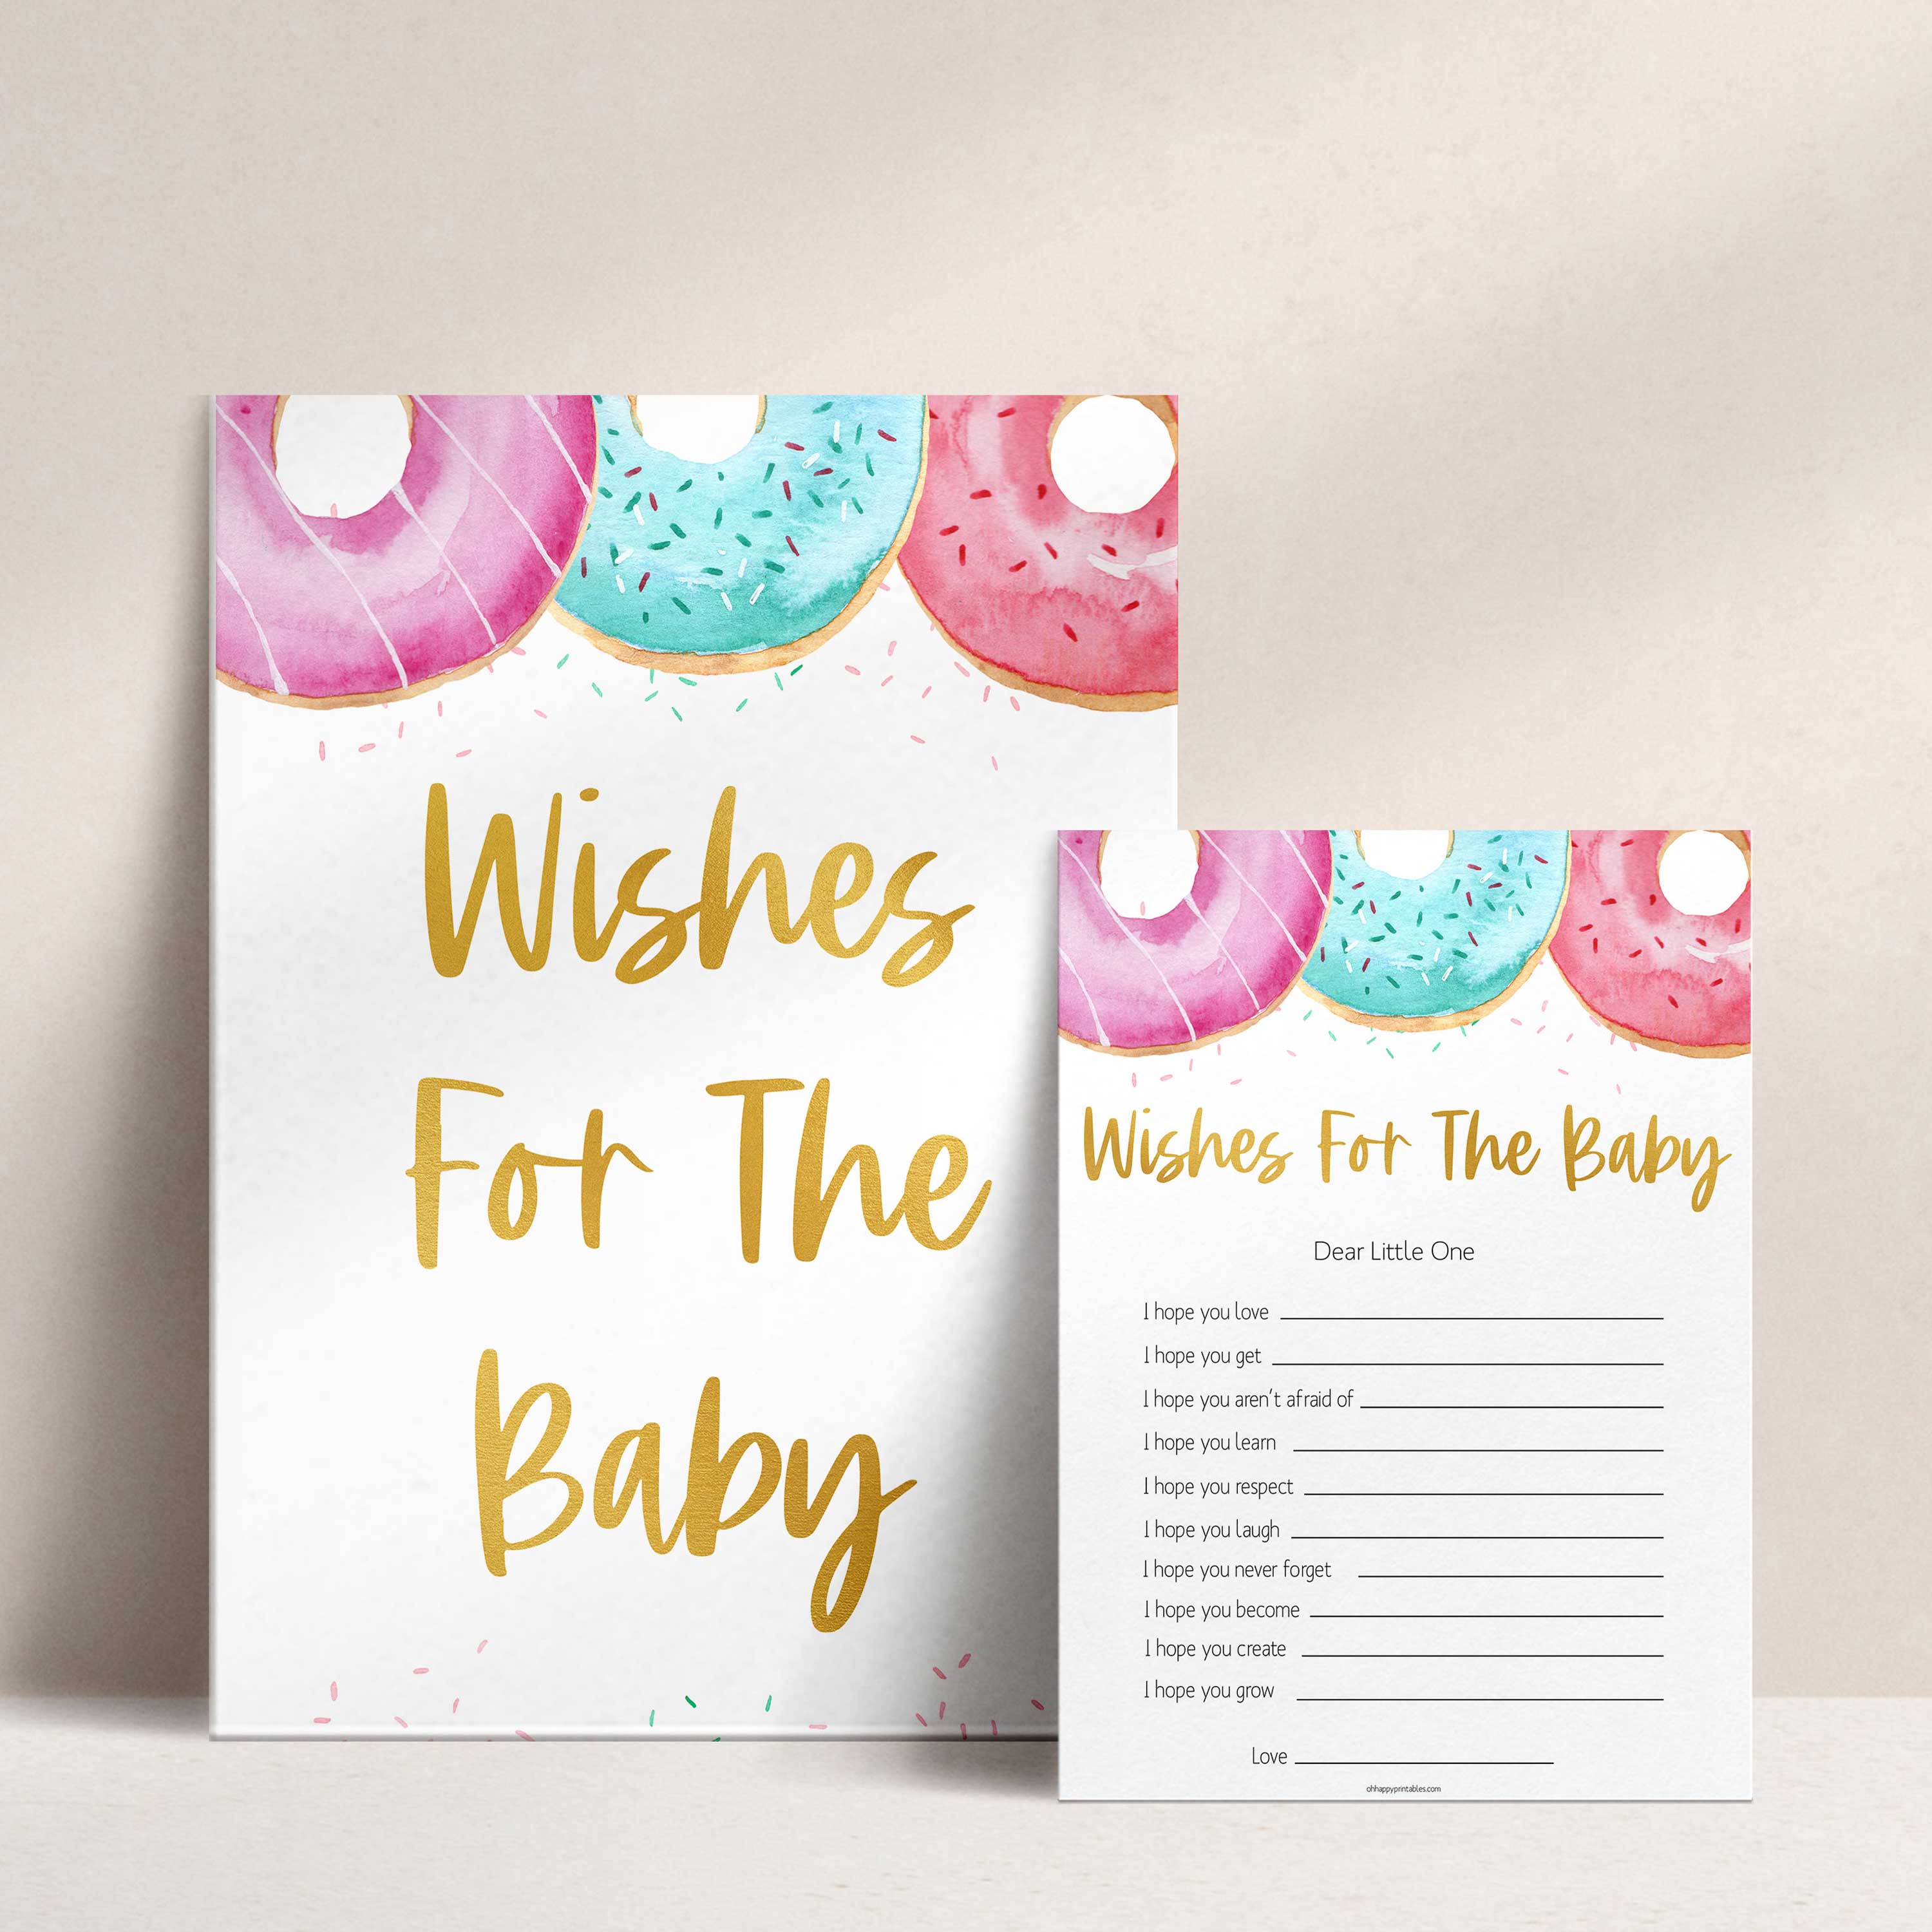 wishes for the baby game, Printable baby shower games, donut baby games, baby shower games, fun baby shower ideas, top baby shower ideas, donut sprinkles baby shower, baby shower games, fun donut baby shower ideas